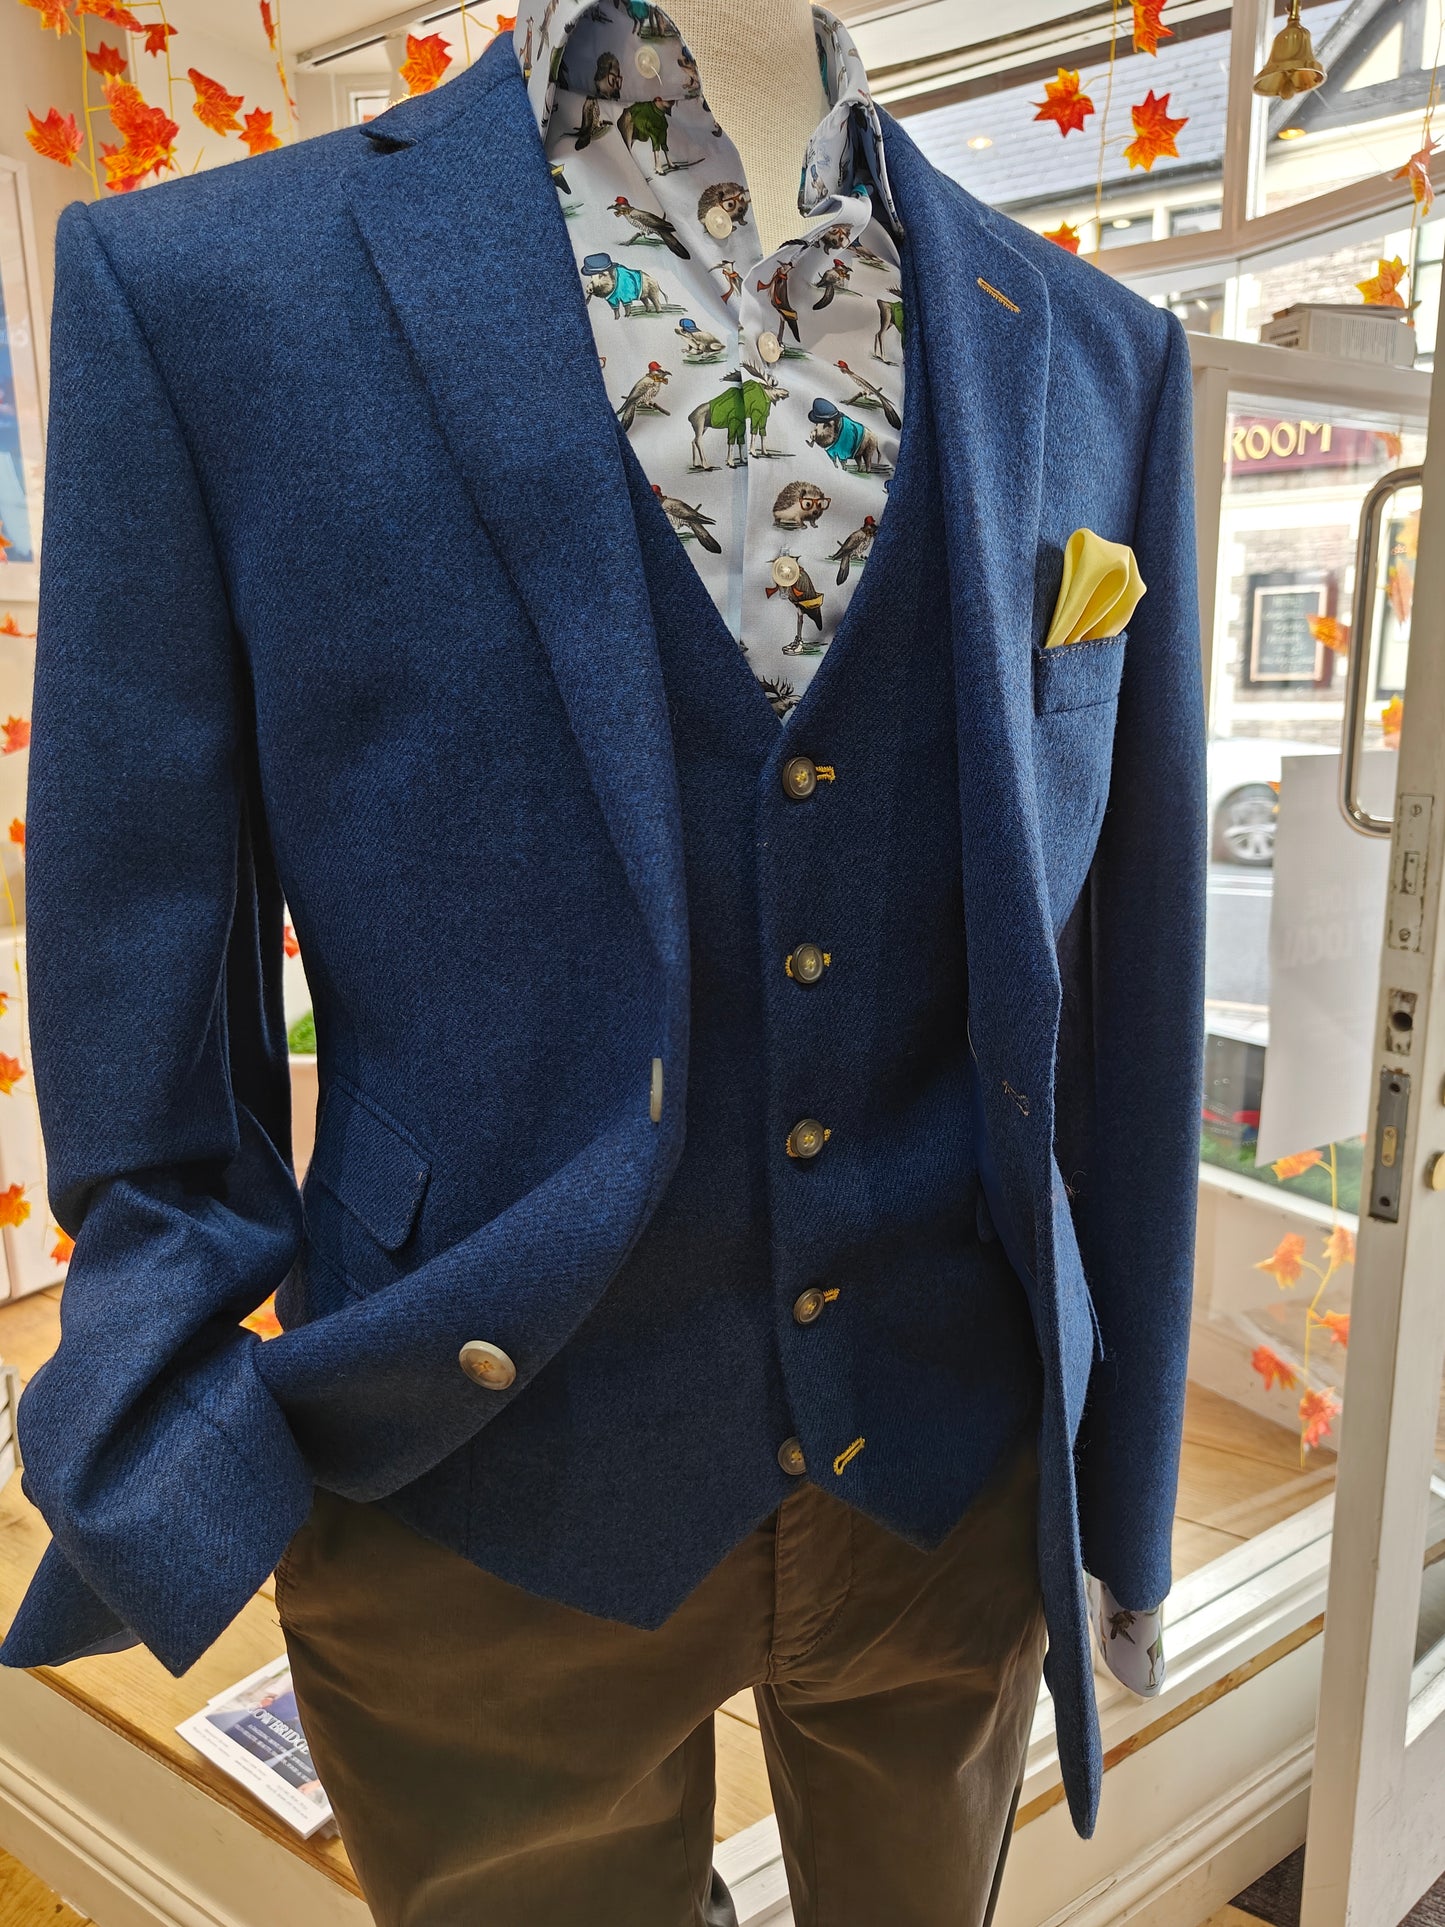 Bright blue tweed with yellow stitching by Mazzelli